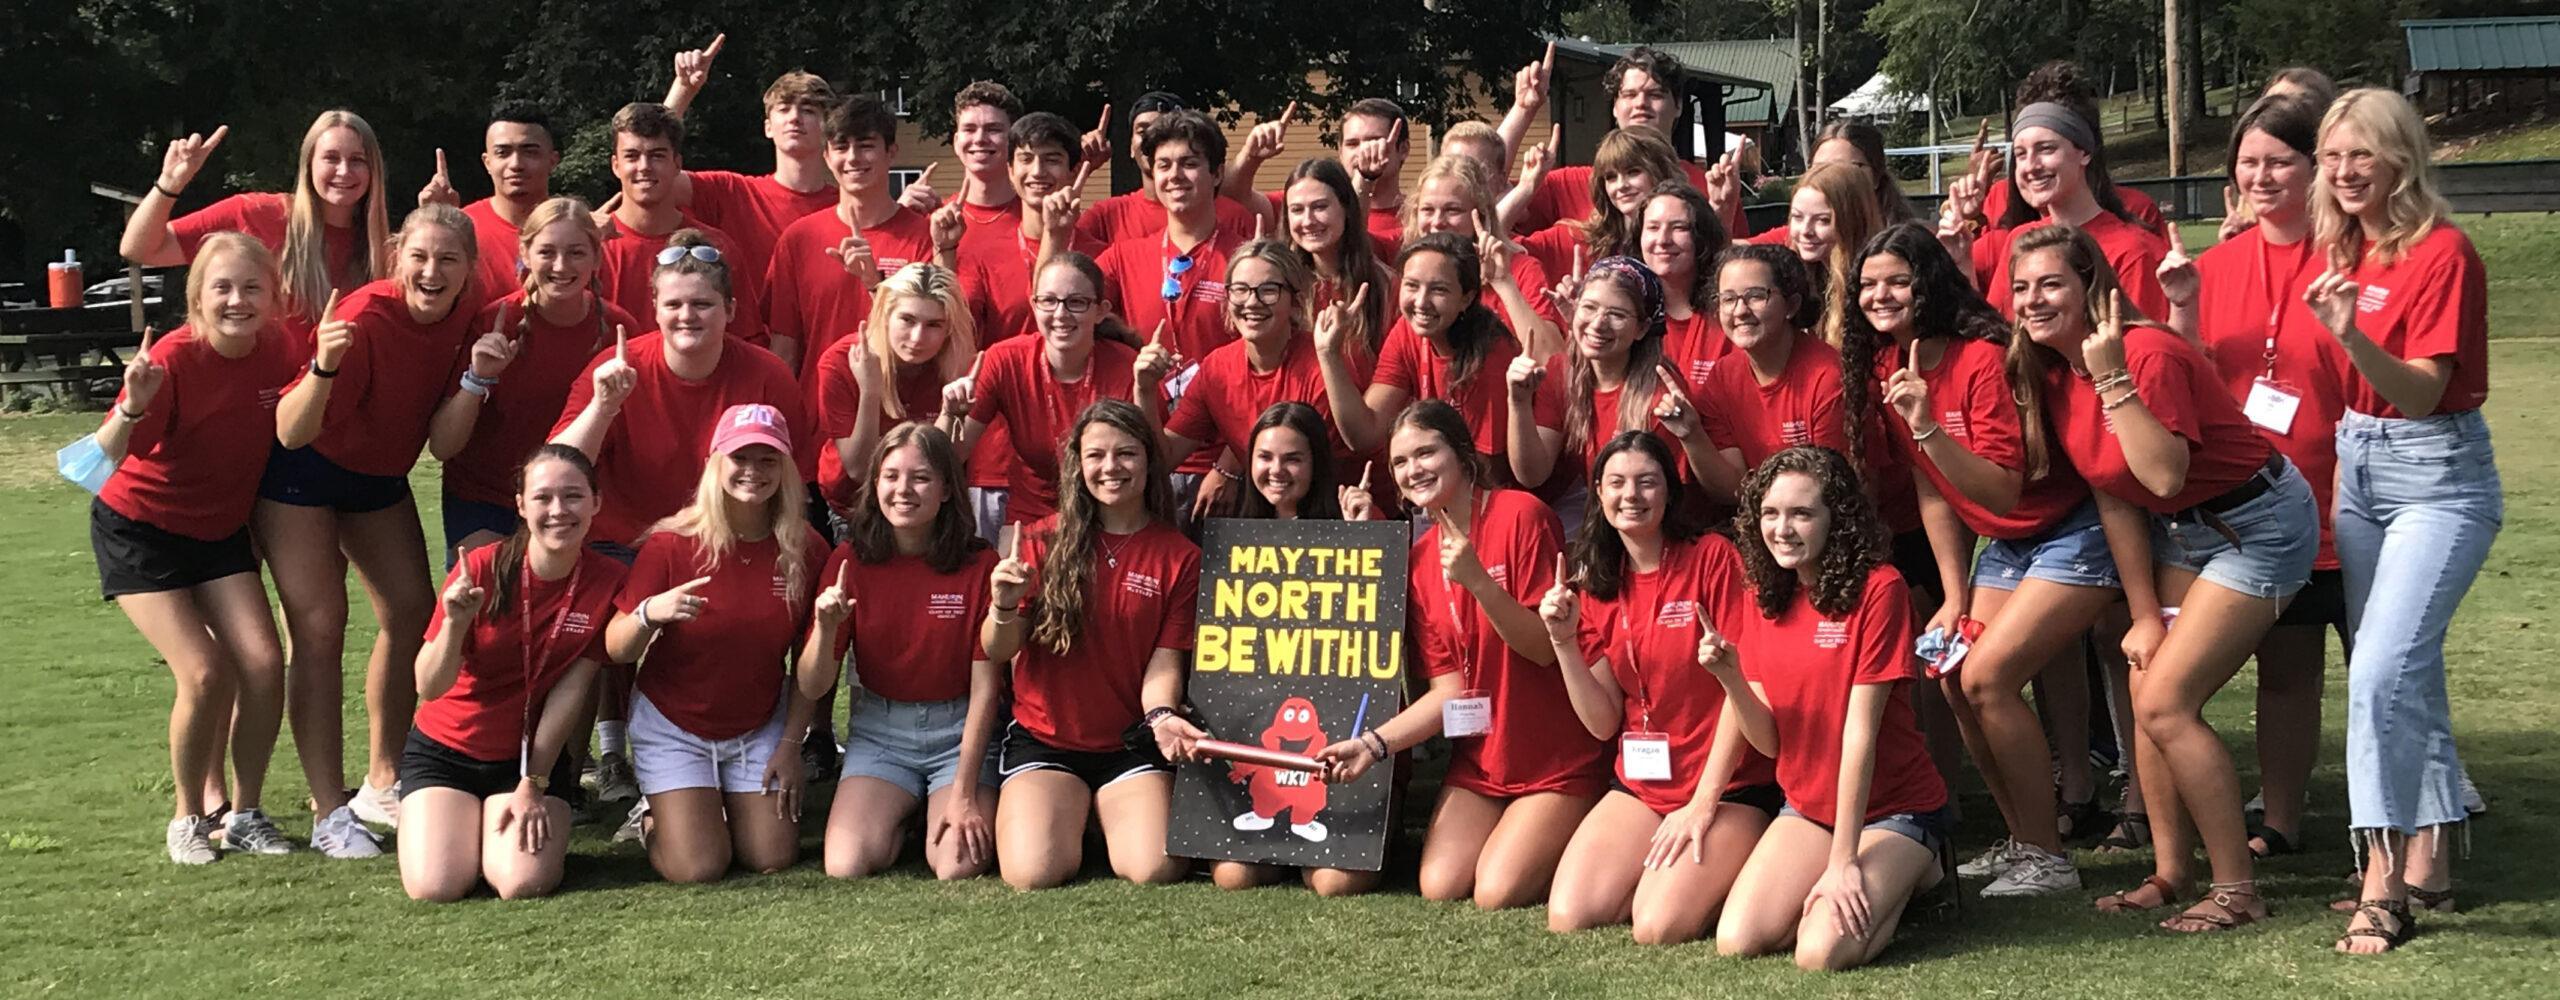 University Group in matching red shirt posing for group photo at Deer Run Camps & Retreats